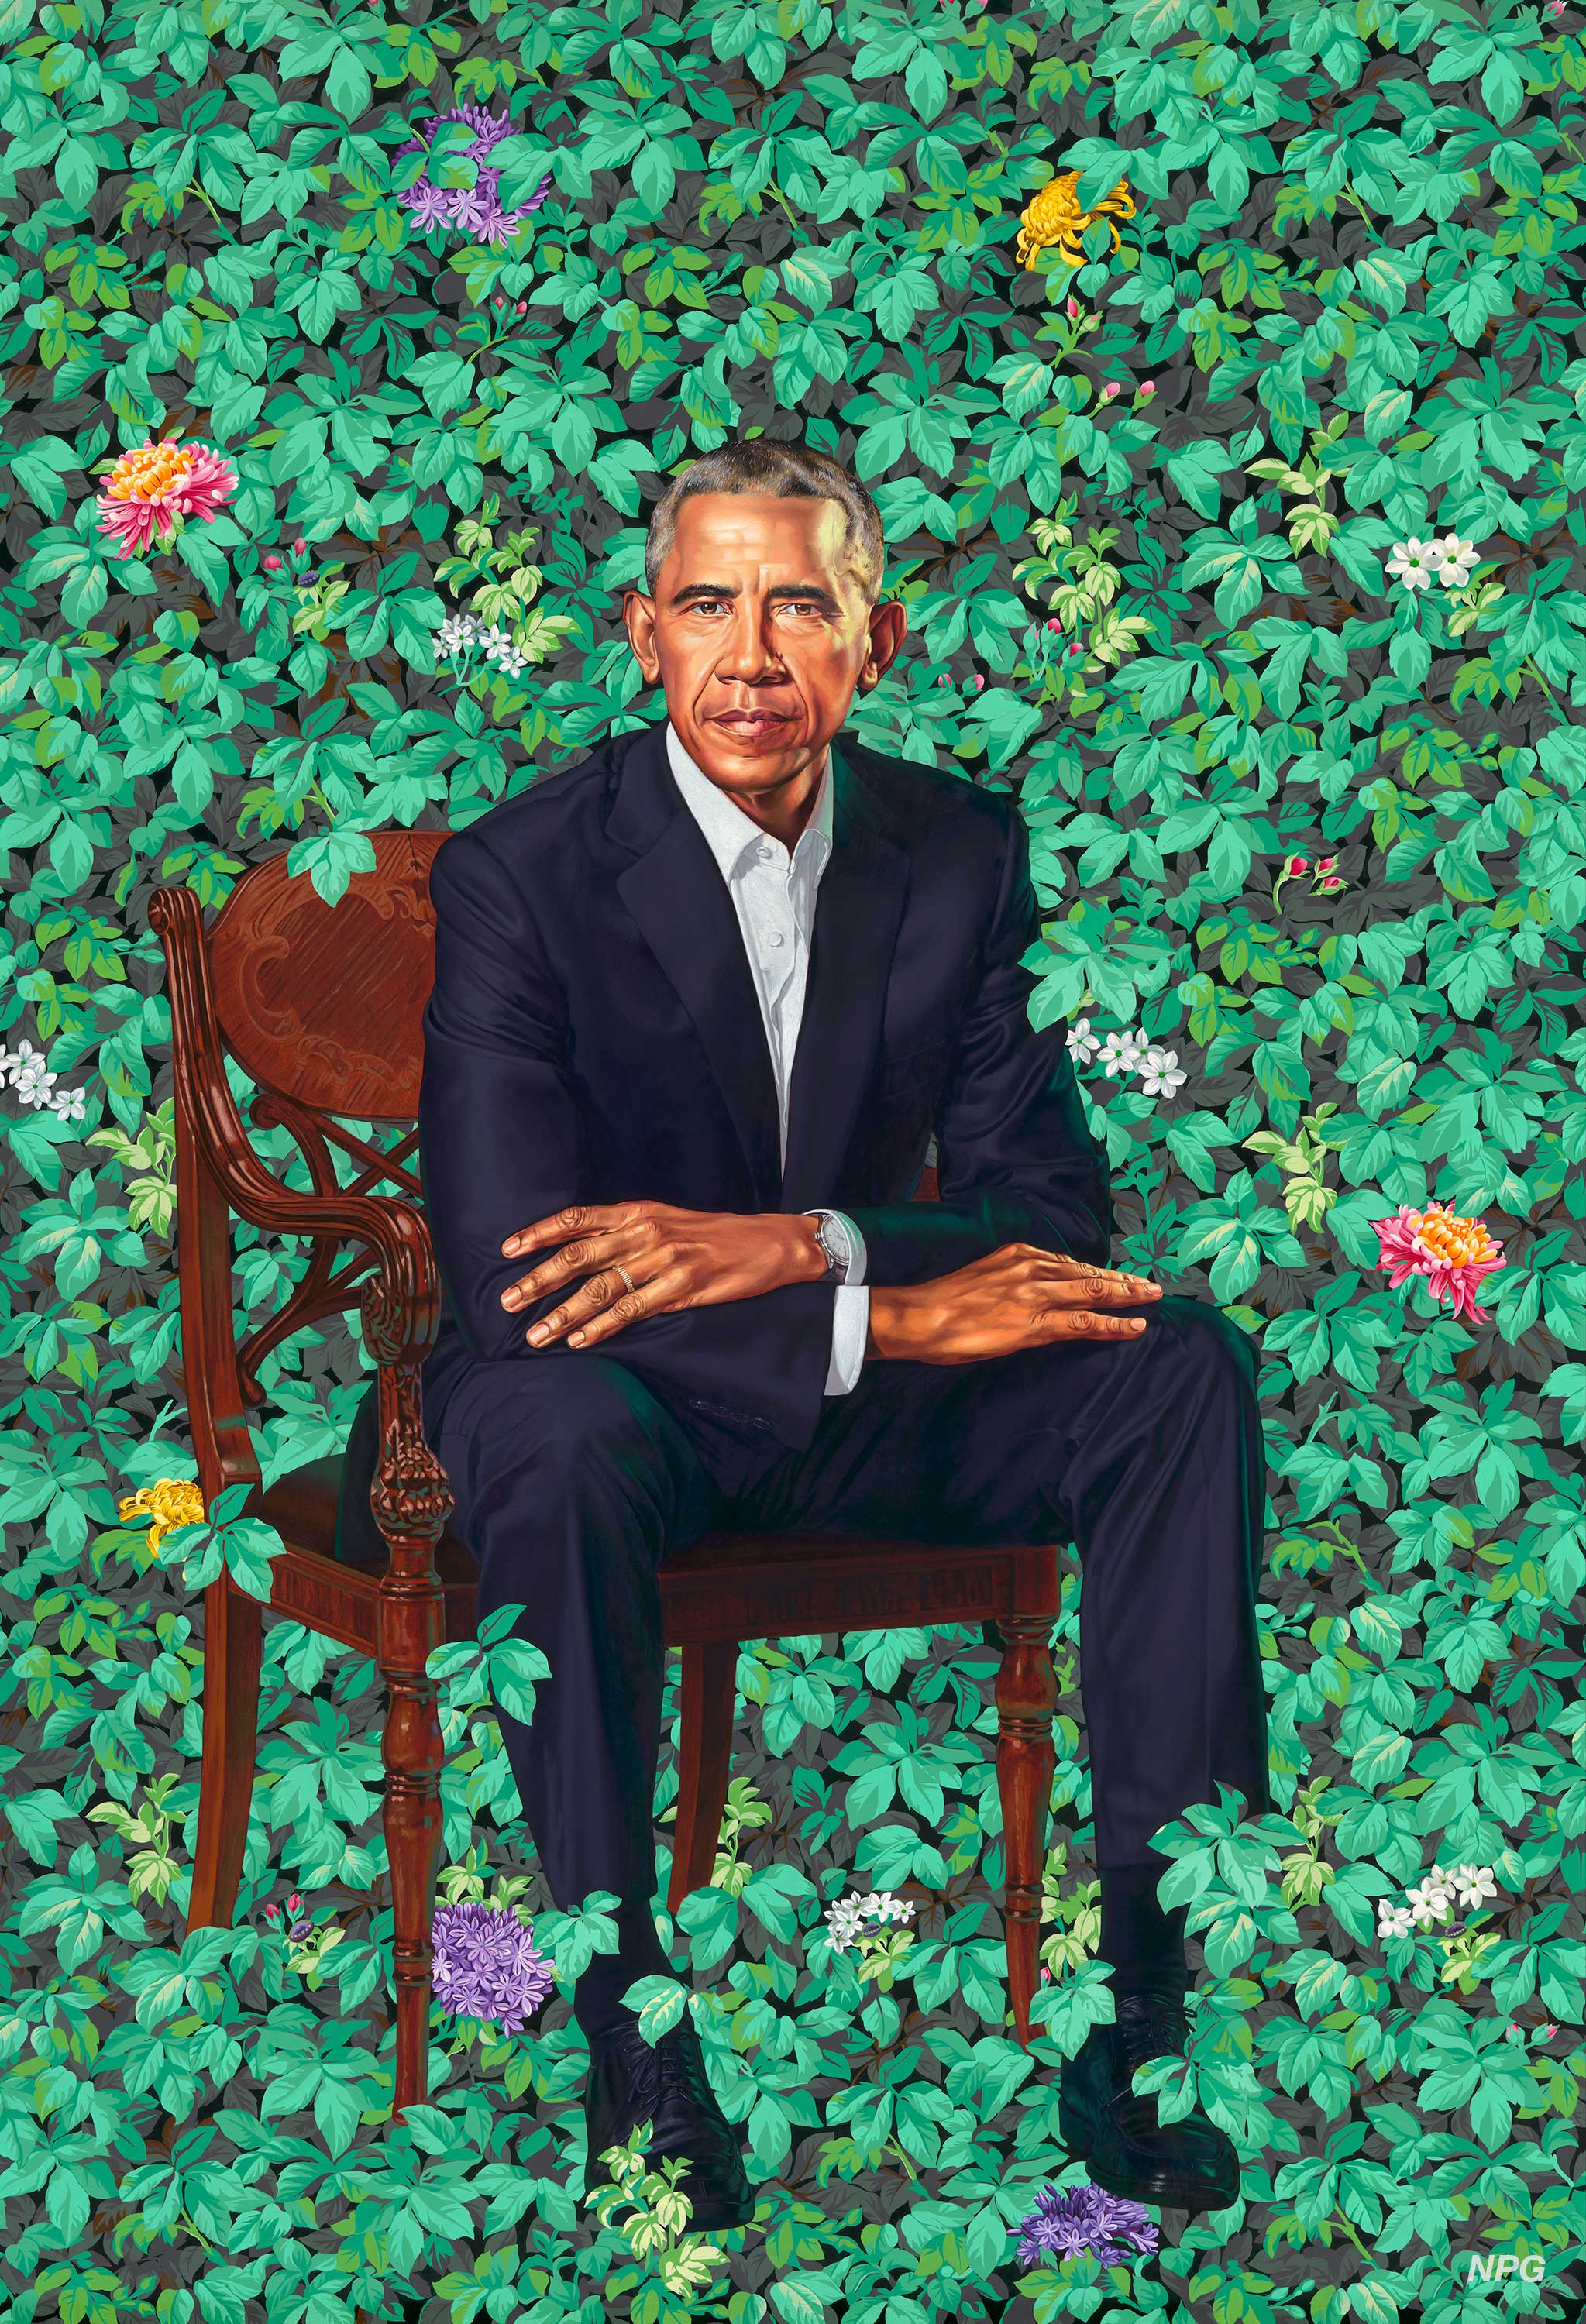 Colorful portrait of a man seated within green foliage and flowers